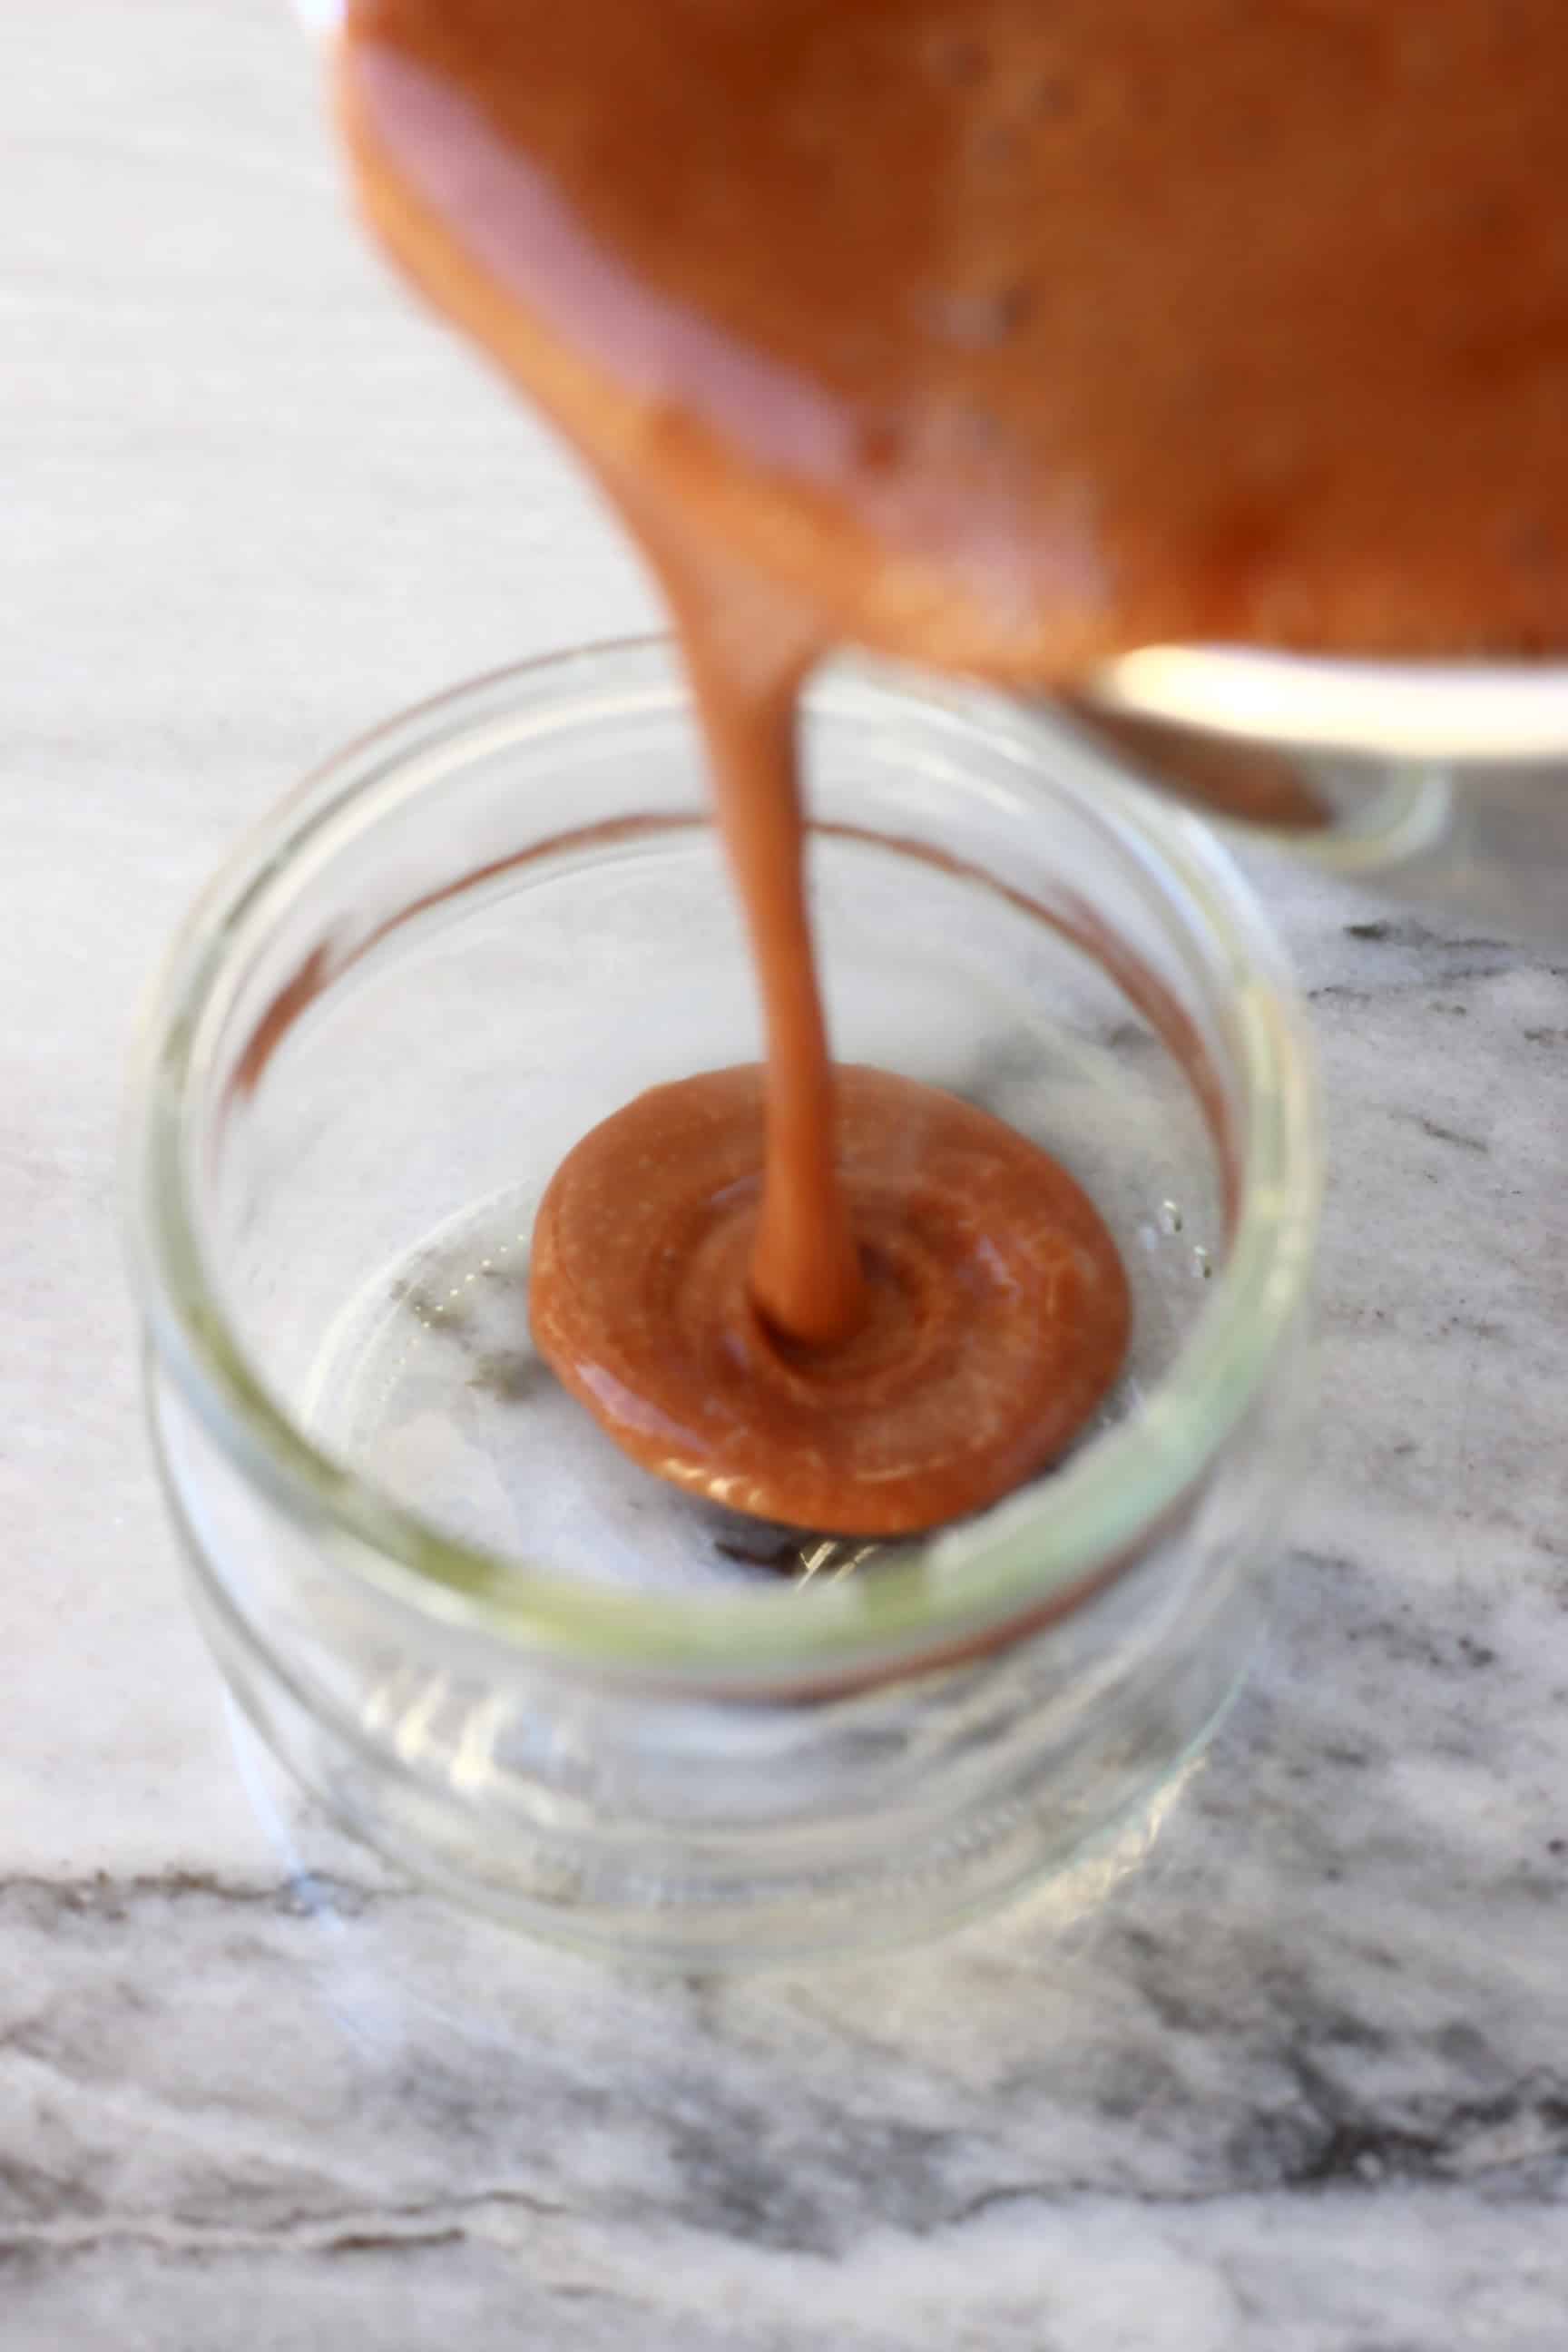 Vegan chocolate pudding mixture being poured into a glass pot from a pan